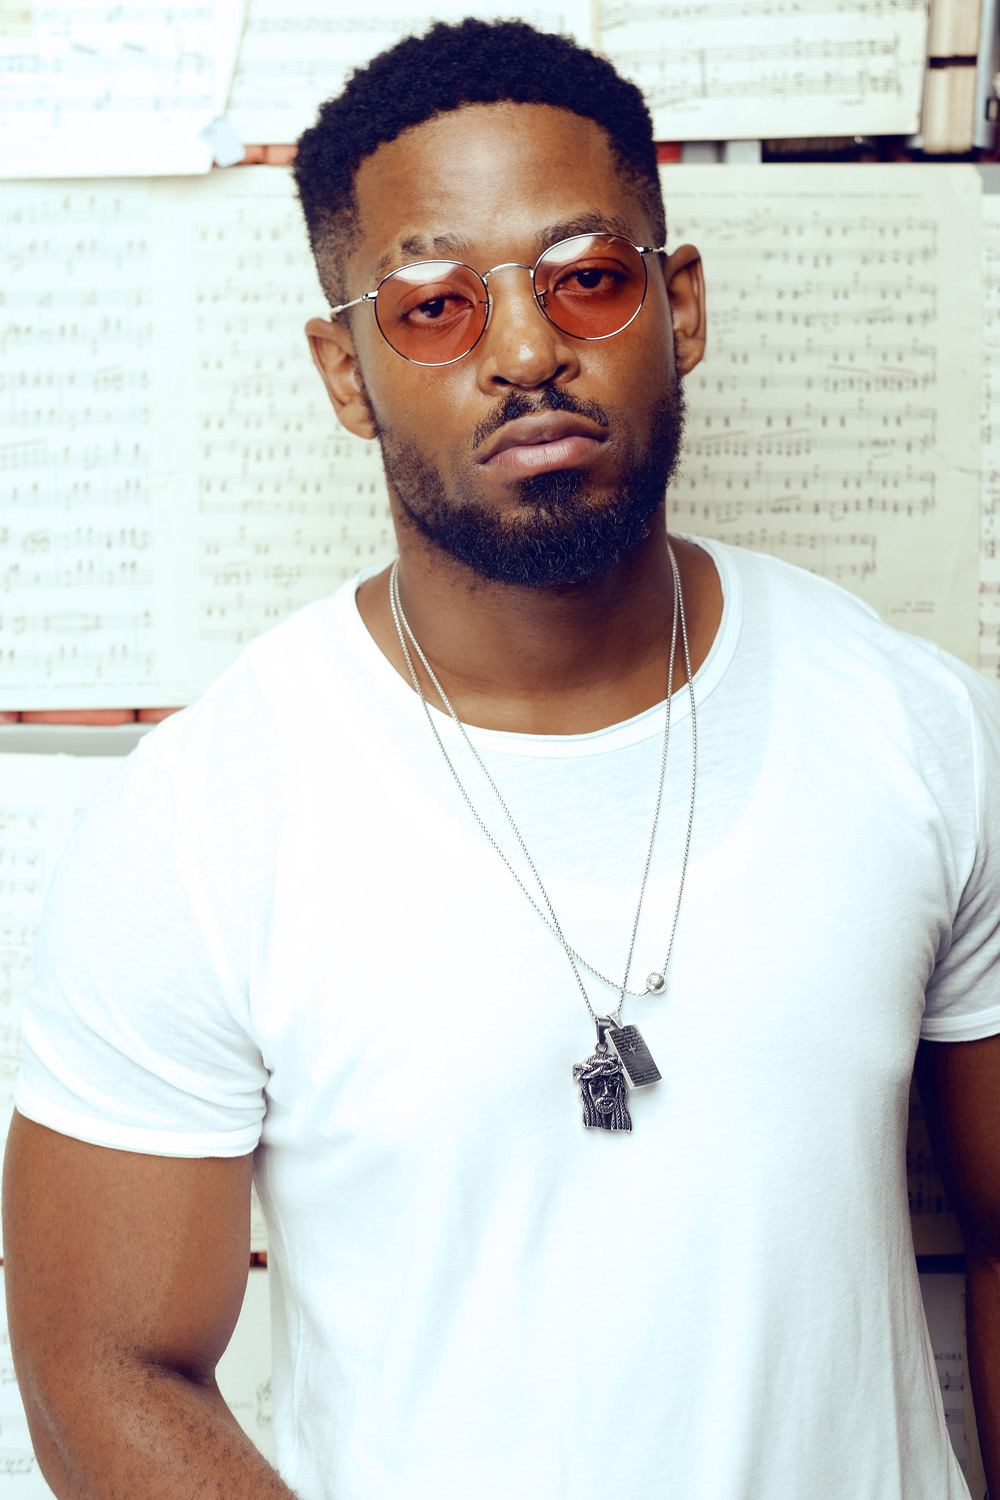 Prince Kaybee reacts to Mr JazziQ hitting on his friend’s girlfriend